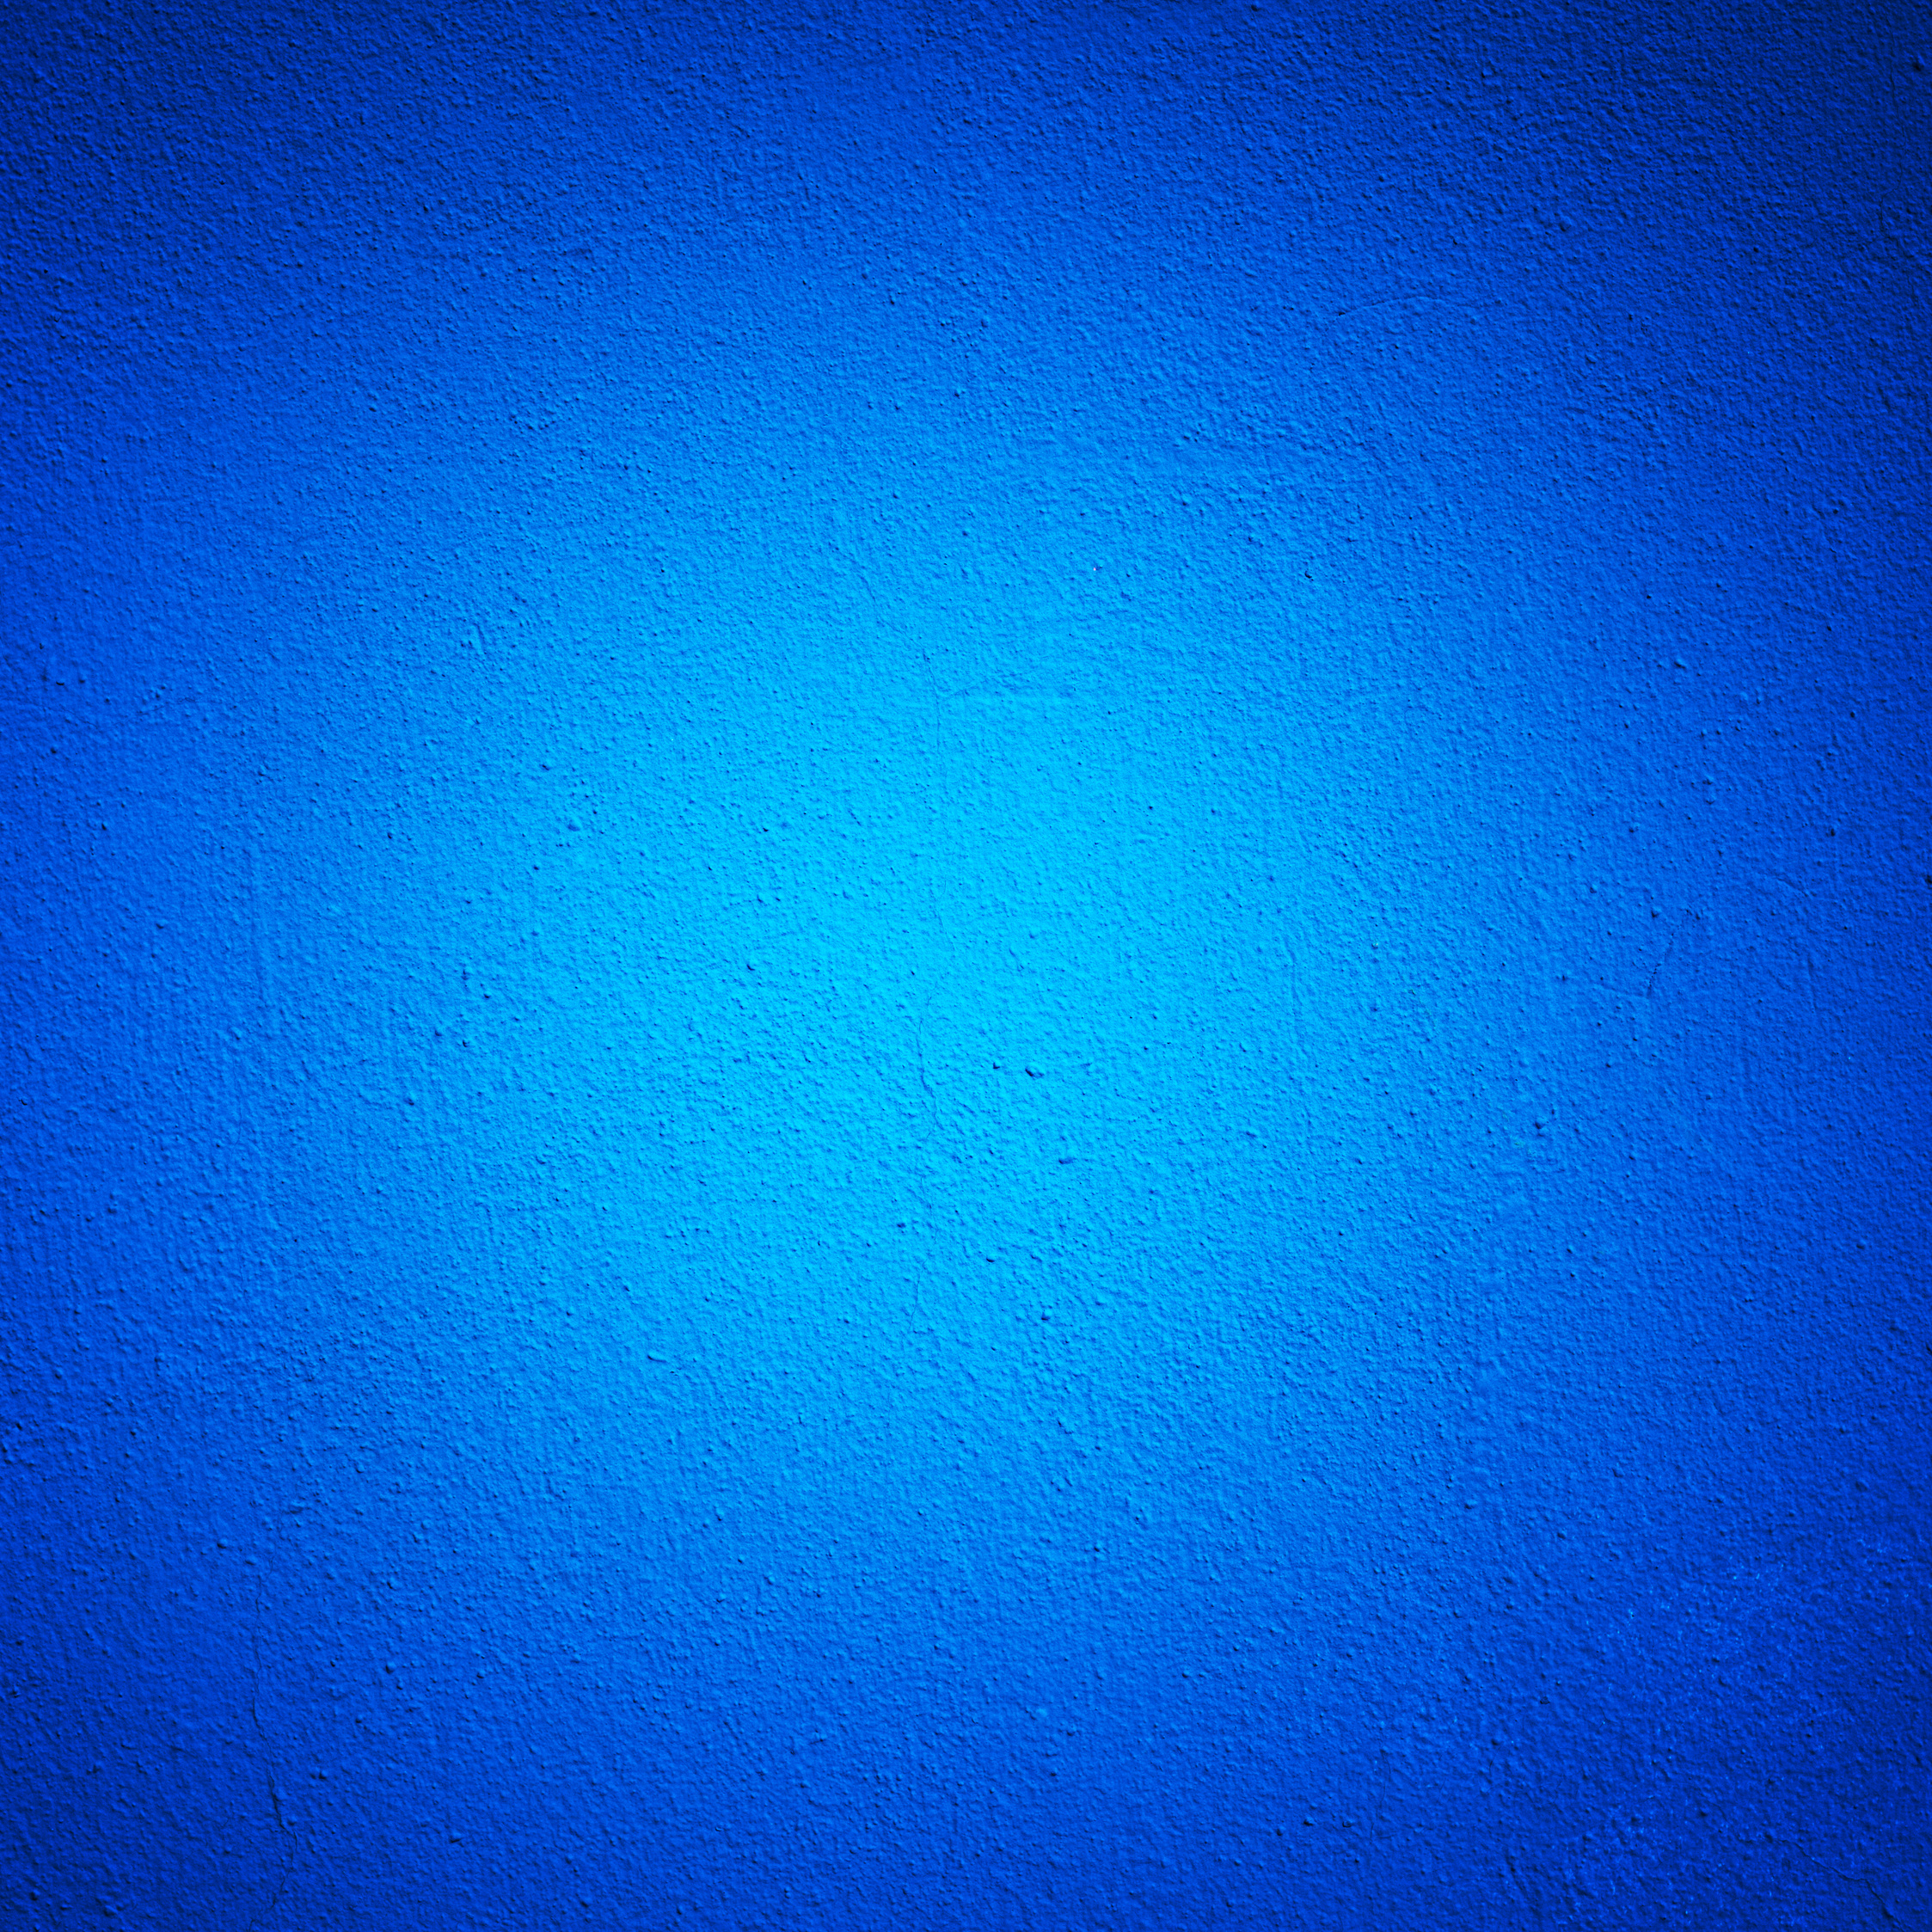 Blue Wall Texture, Square